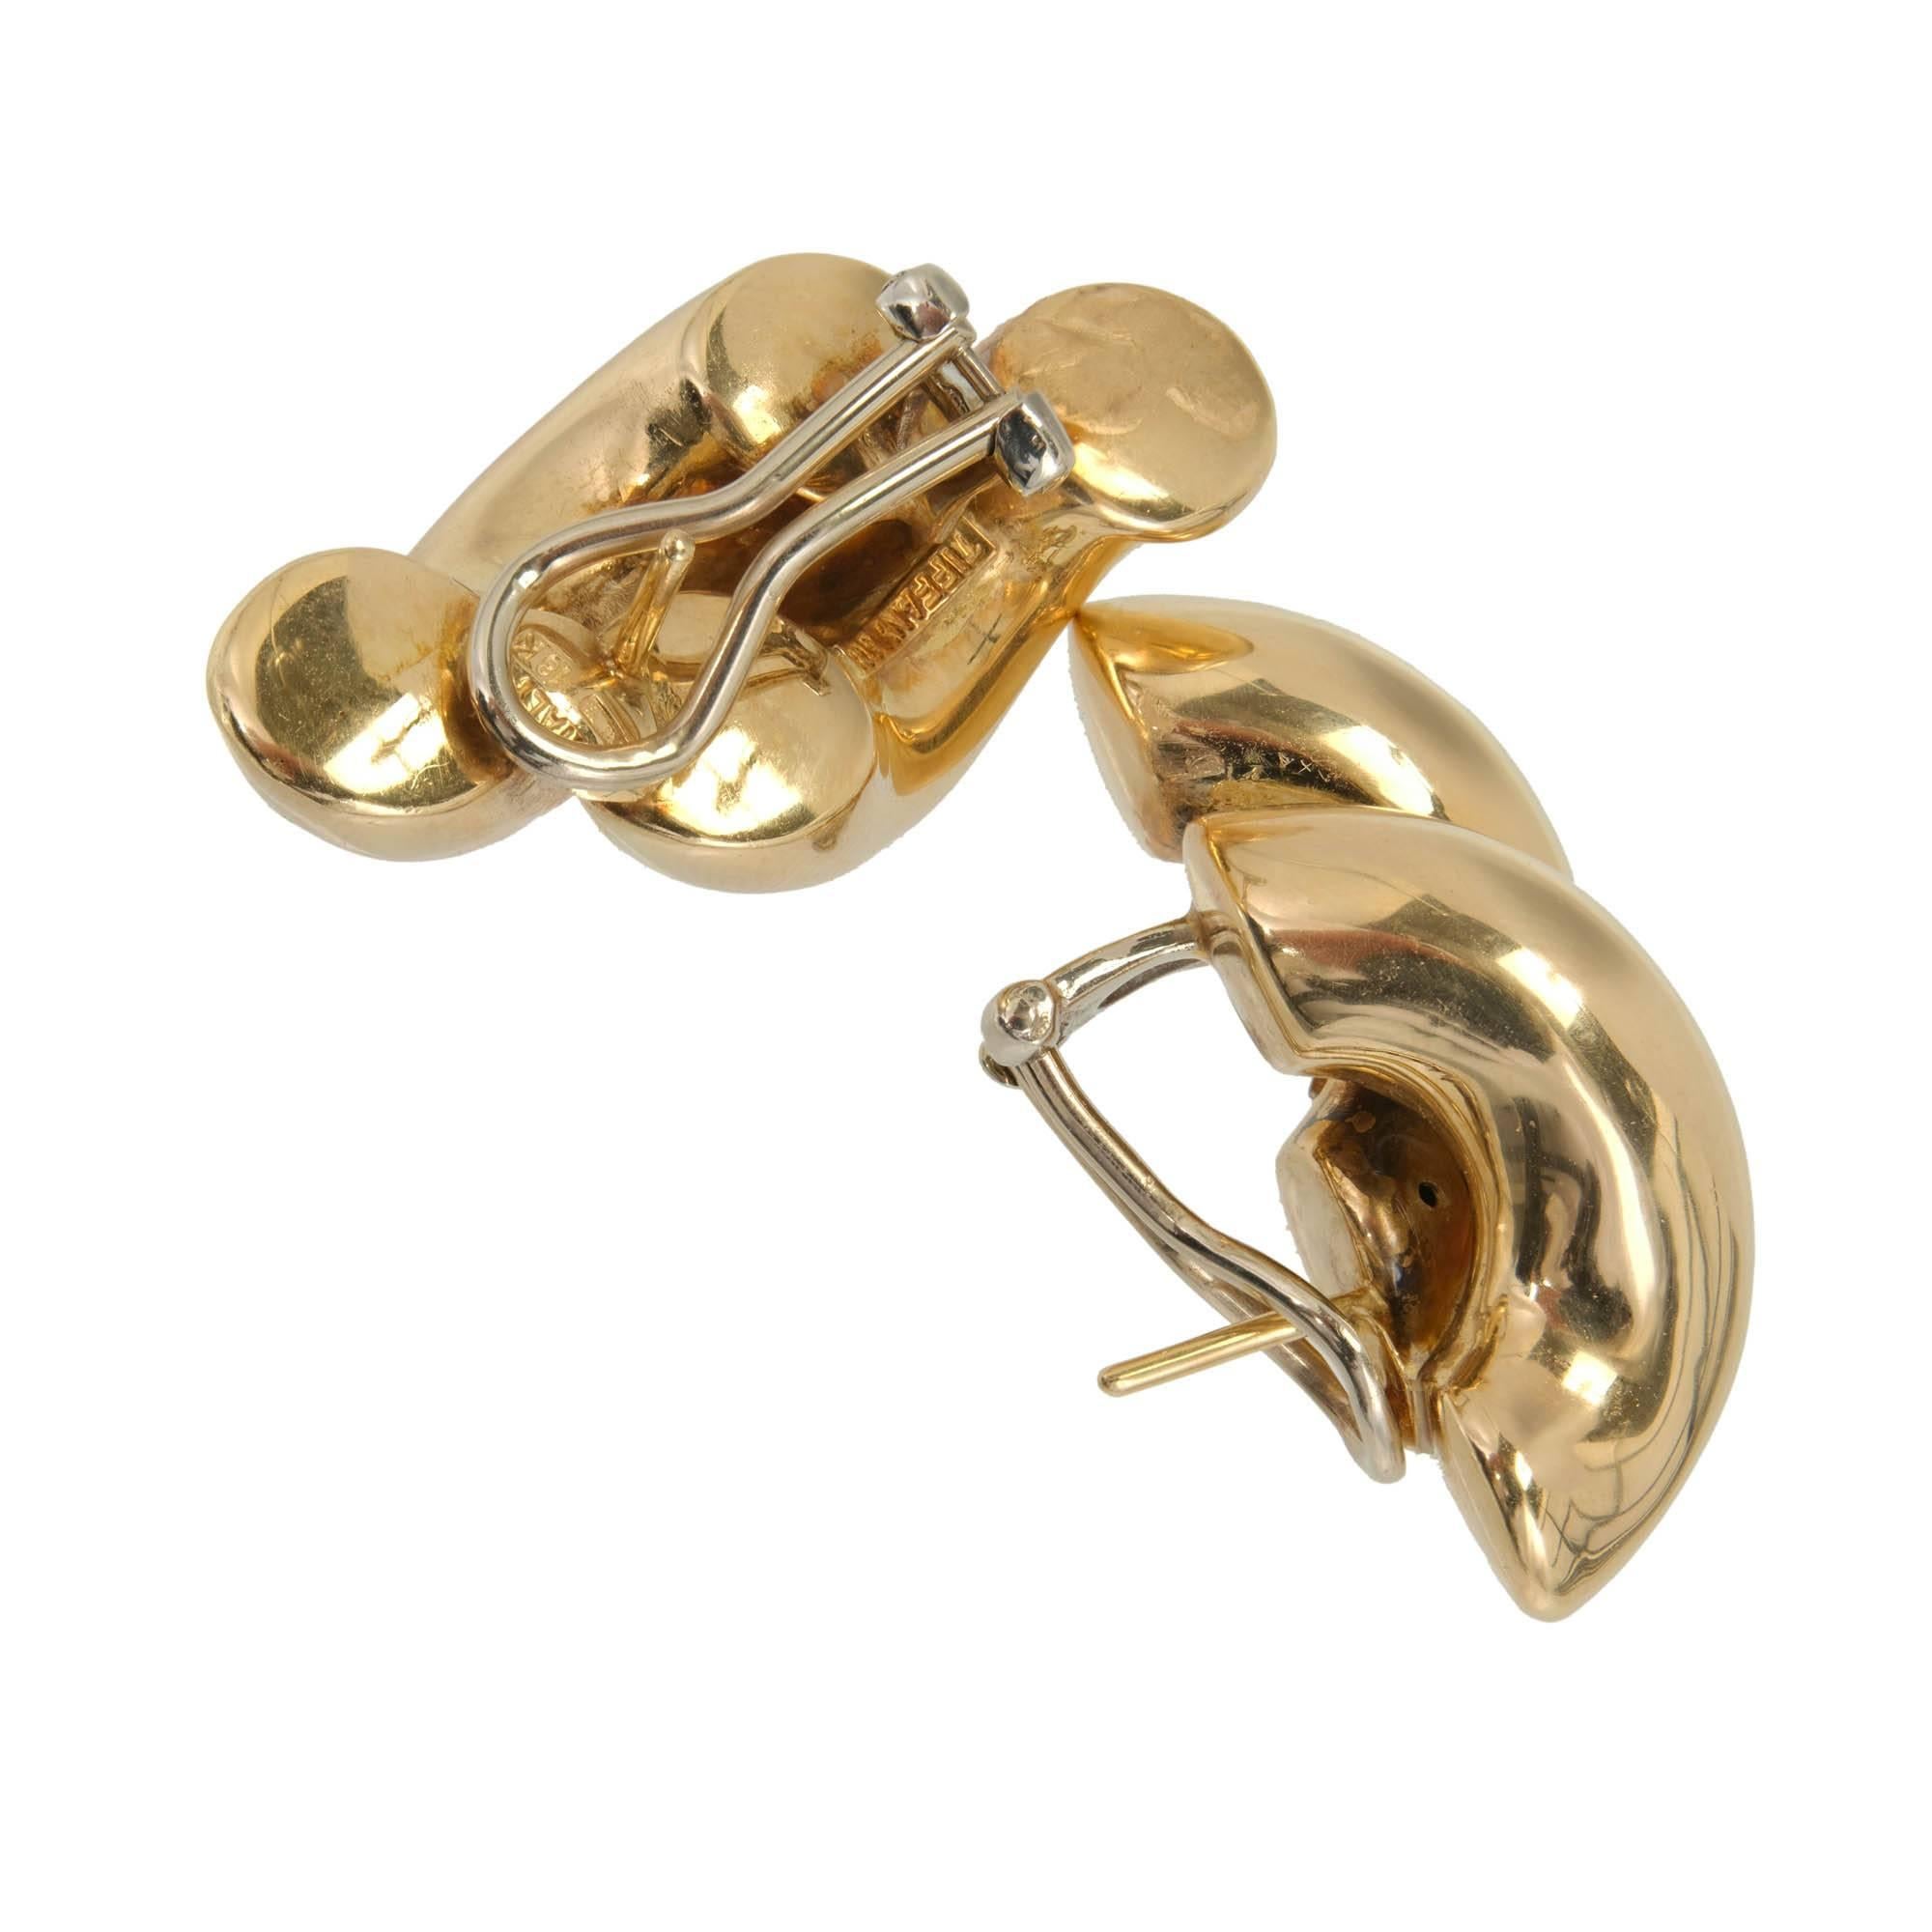 1970's Authentic Tiffany + Co double swirl link 3-D clip post earrings. Made from 18k yellow gold, each earring features a graceful double swirl link design, exuding a sense of fluidity and movement. The clip post closure ensures a secure and